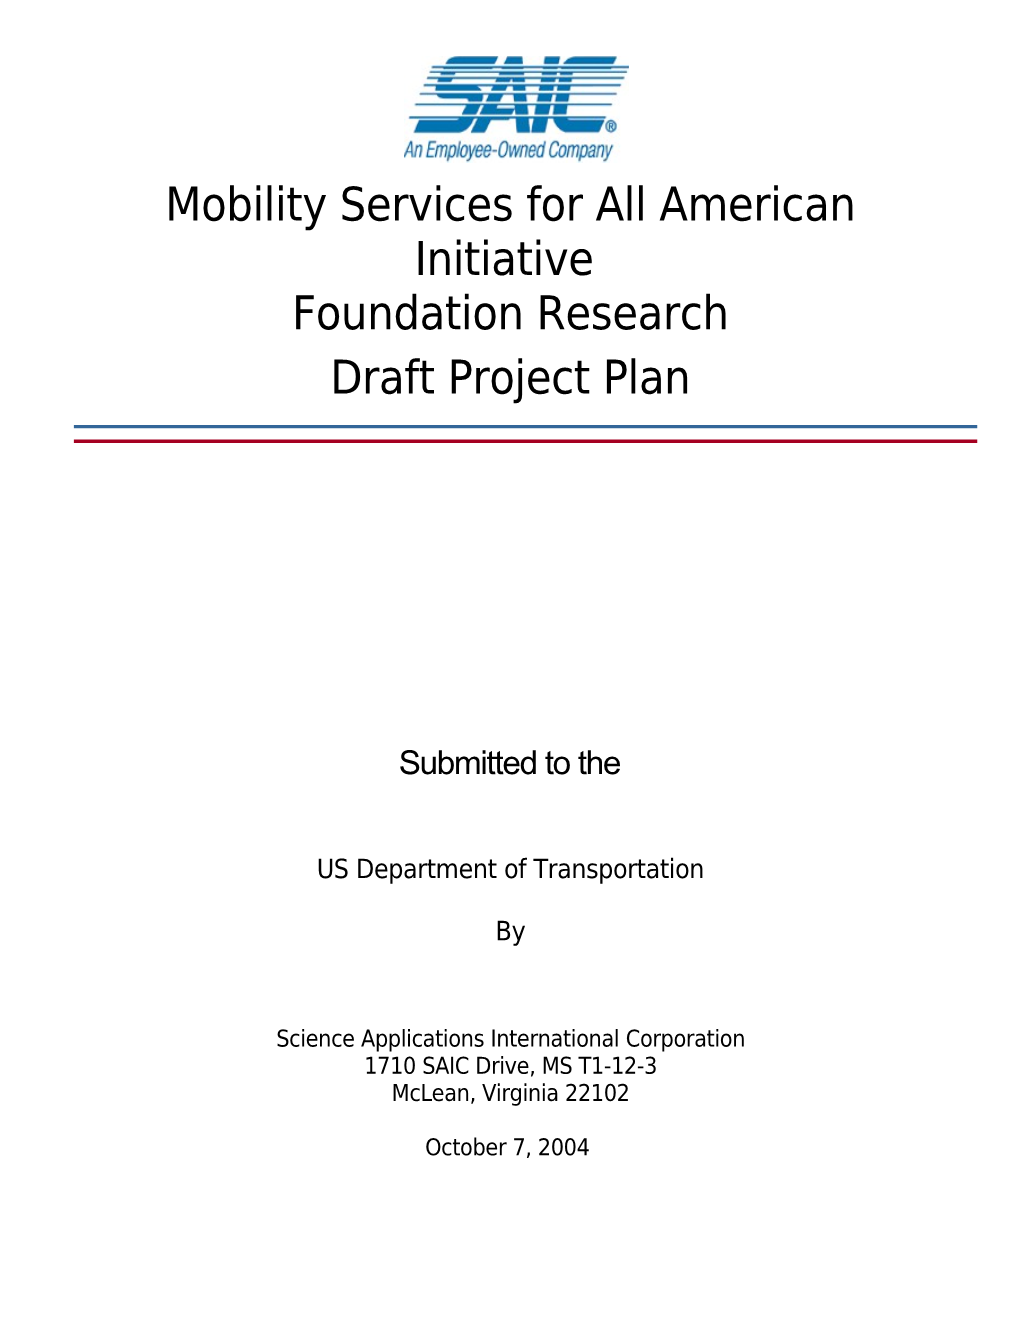 Mobility Services for All American Initiative Foundation Research